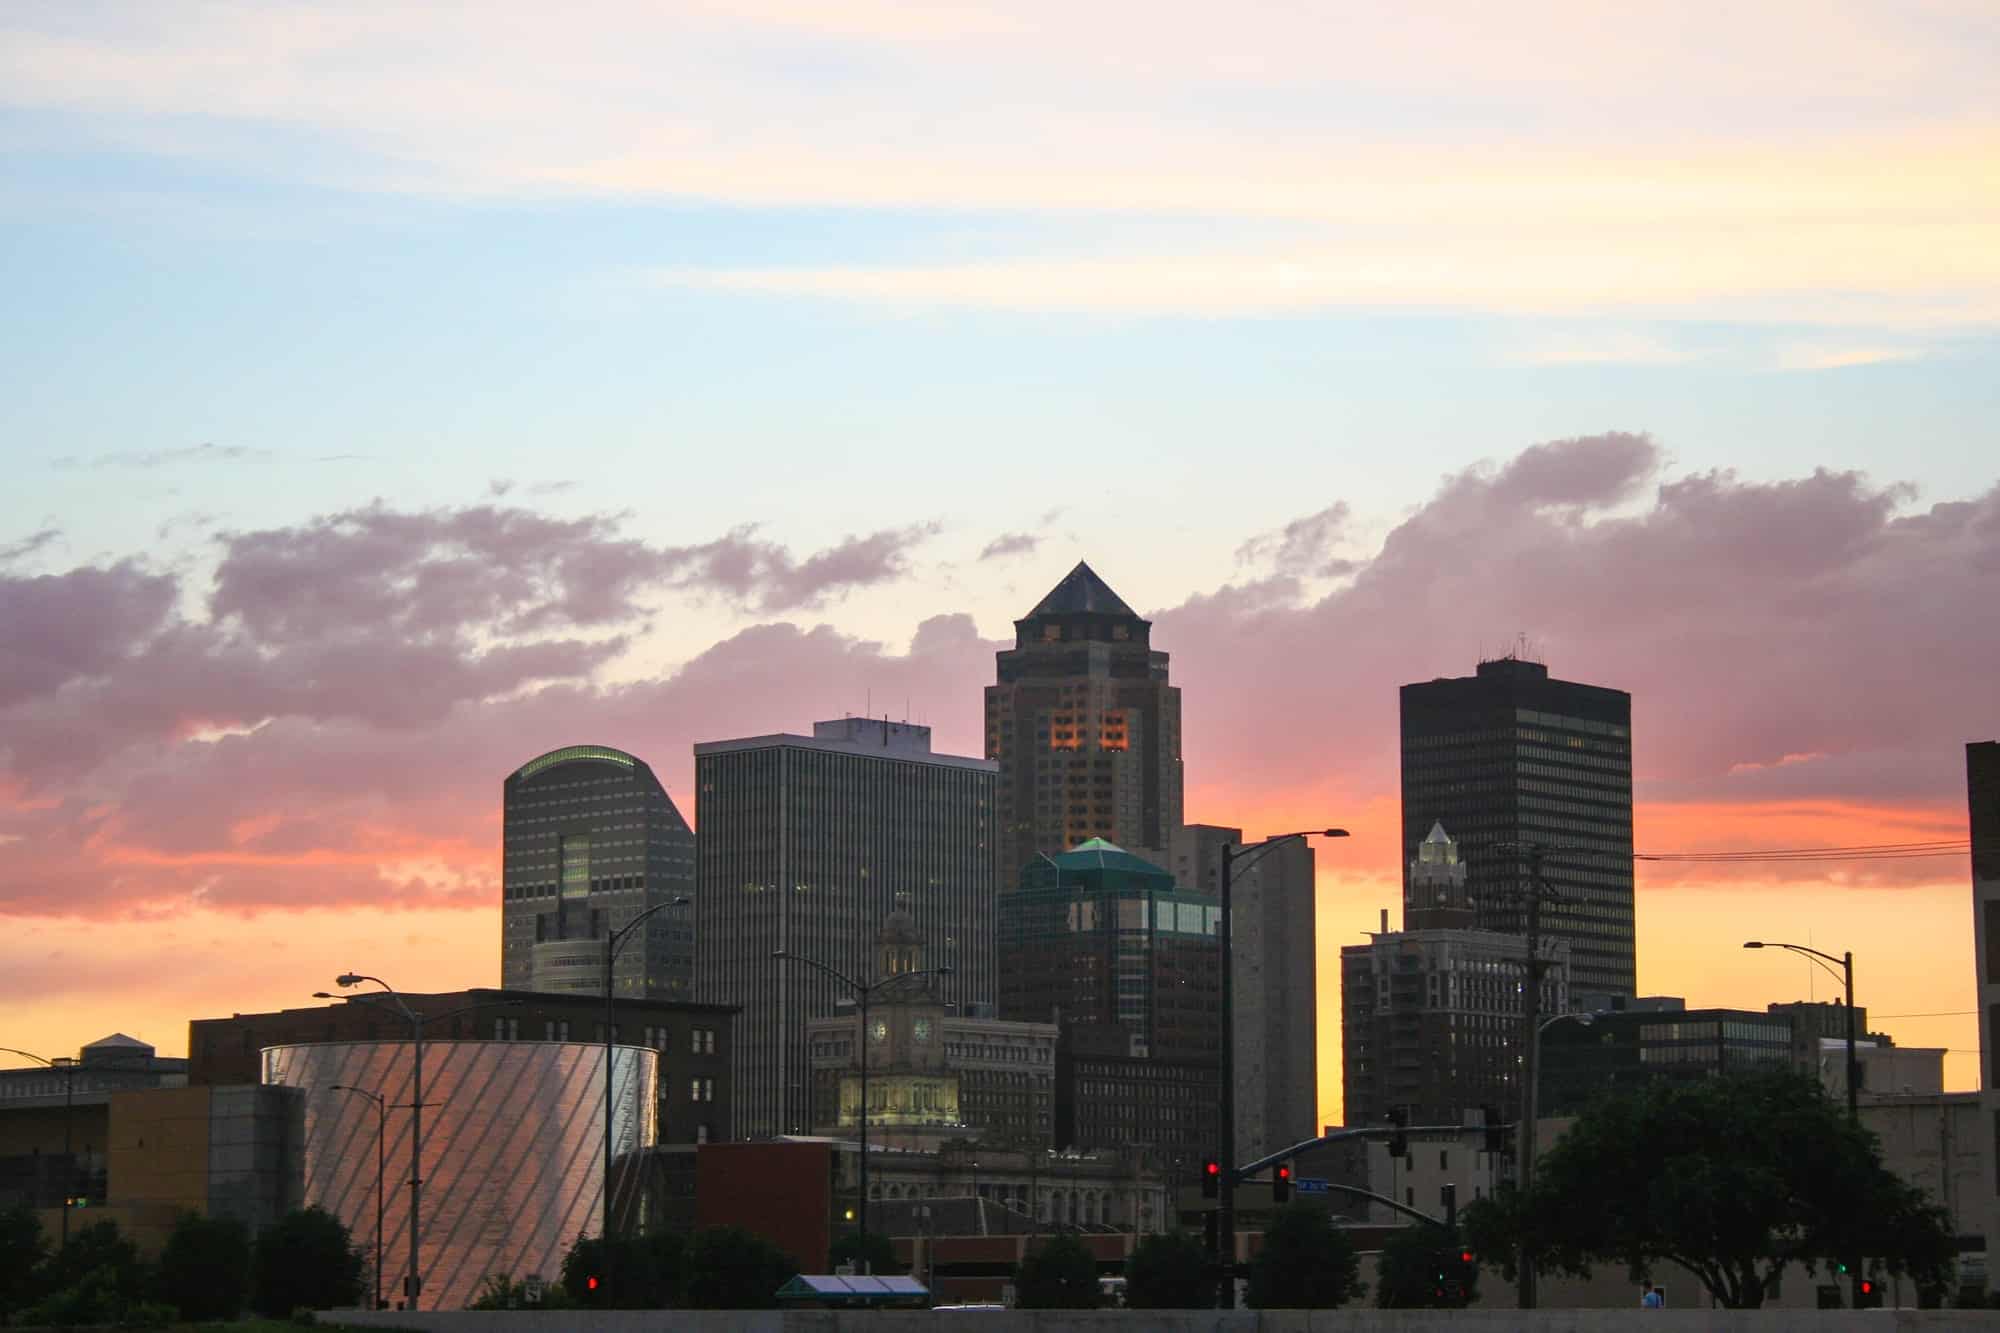 Downtown Des Moines, Iowa at sunset